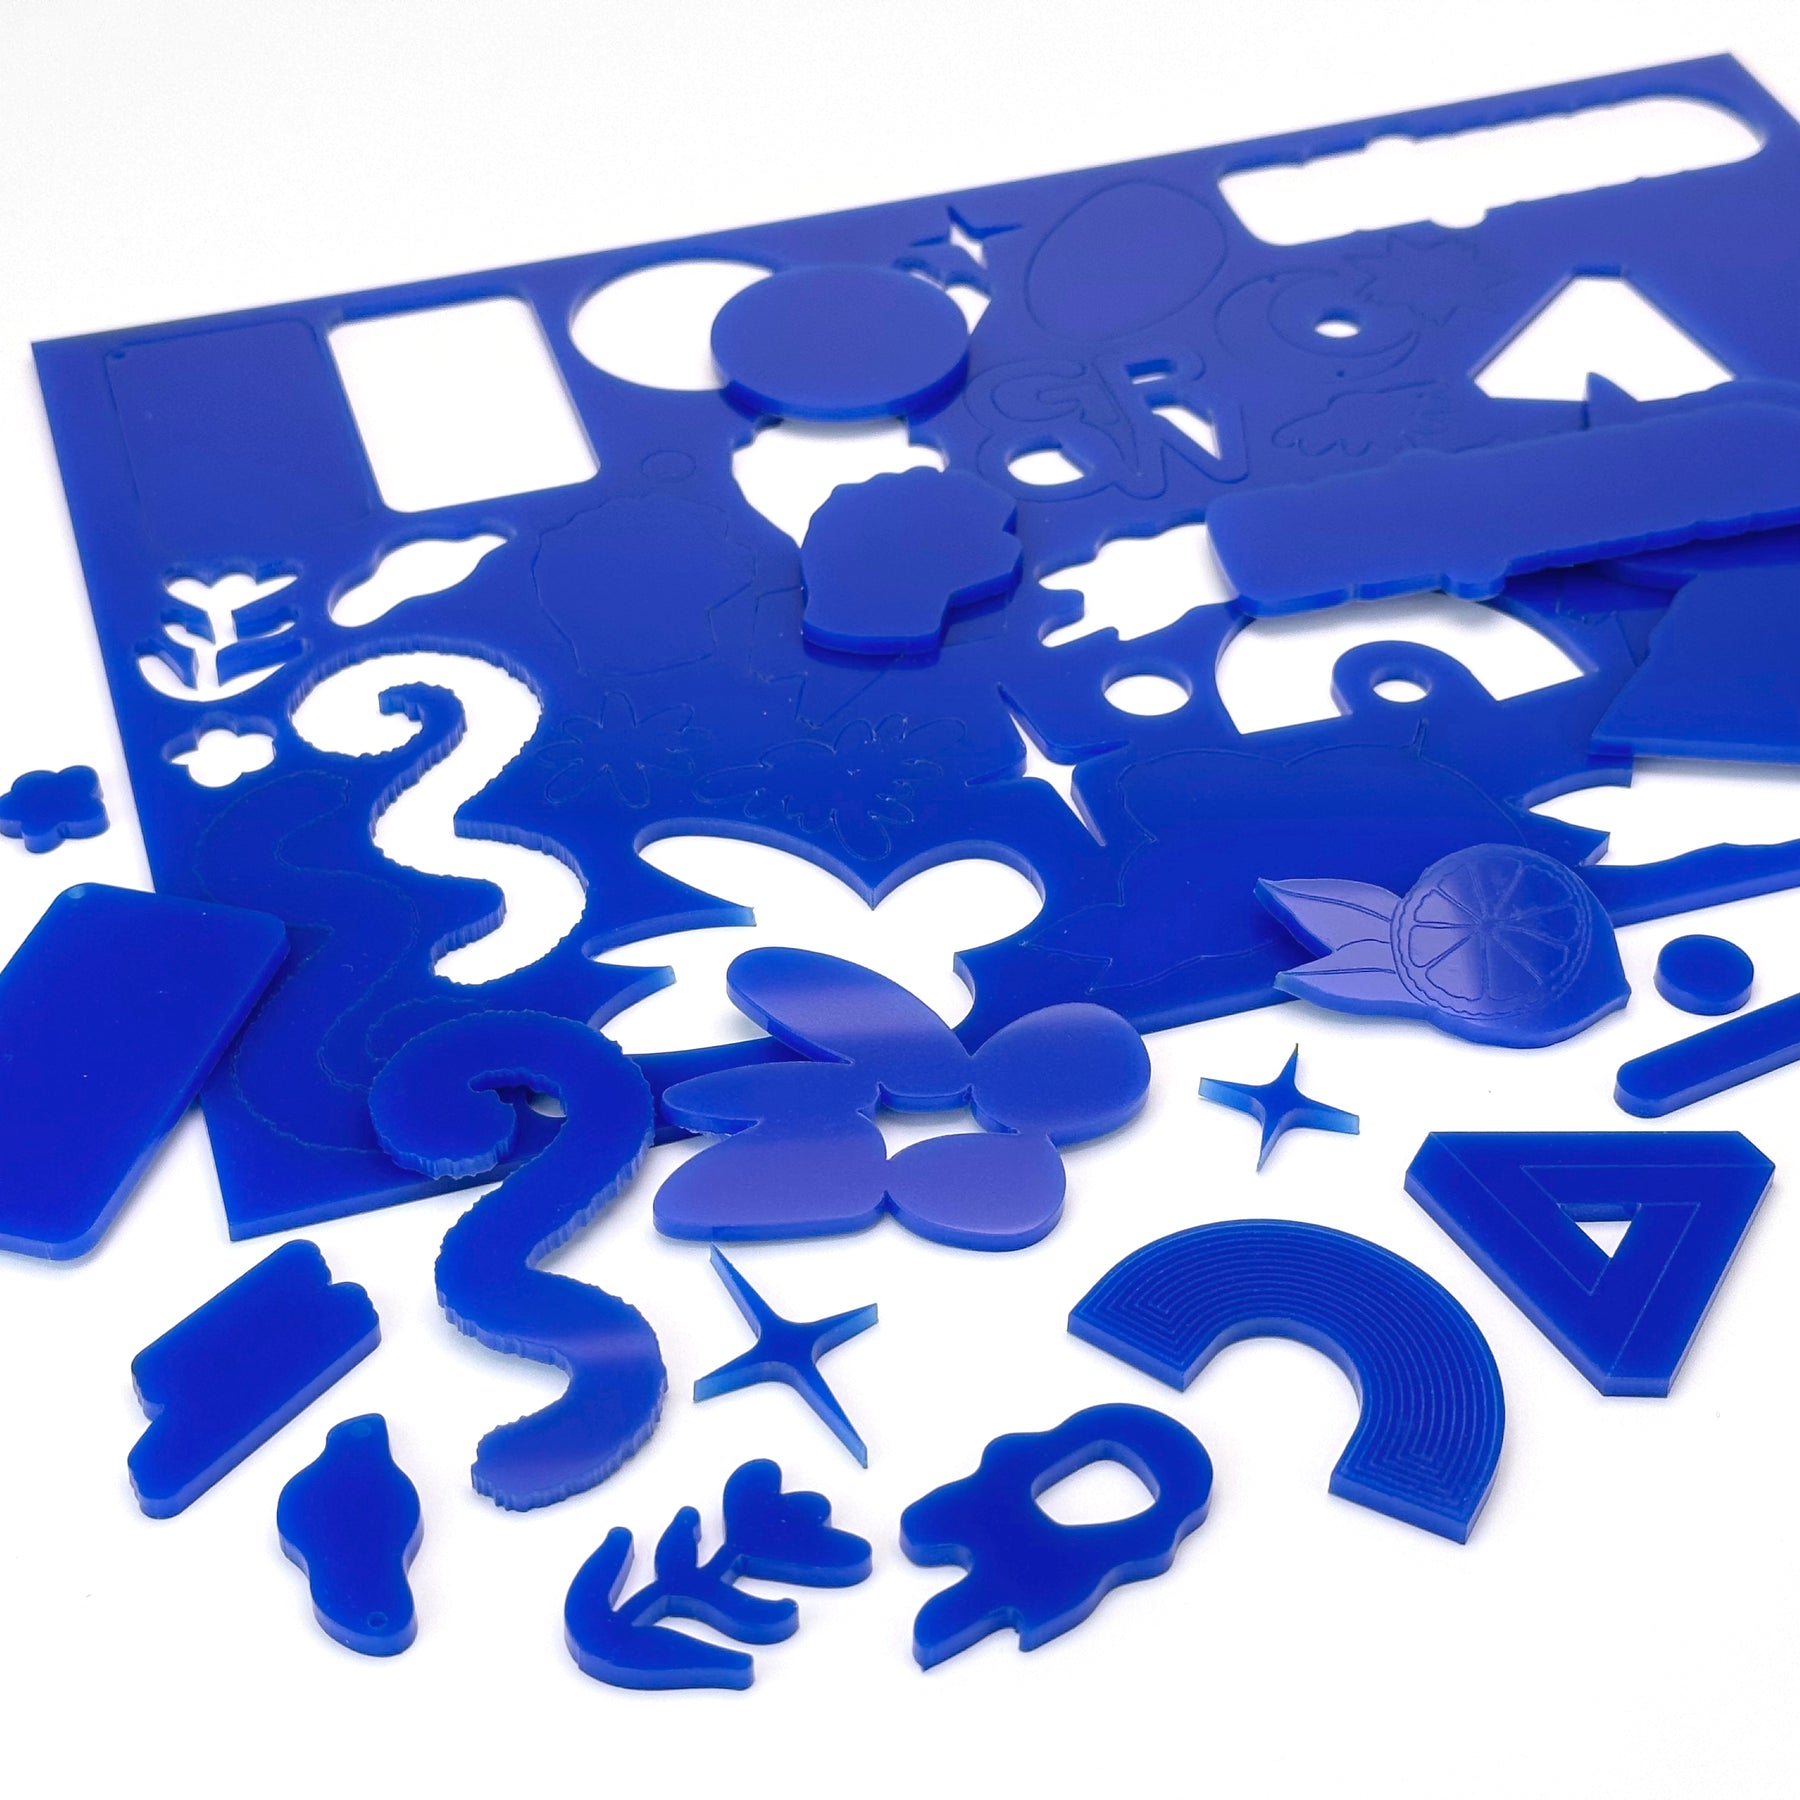 Blue Acrylic with laser cutting only - 300x200mm